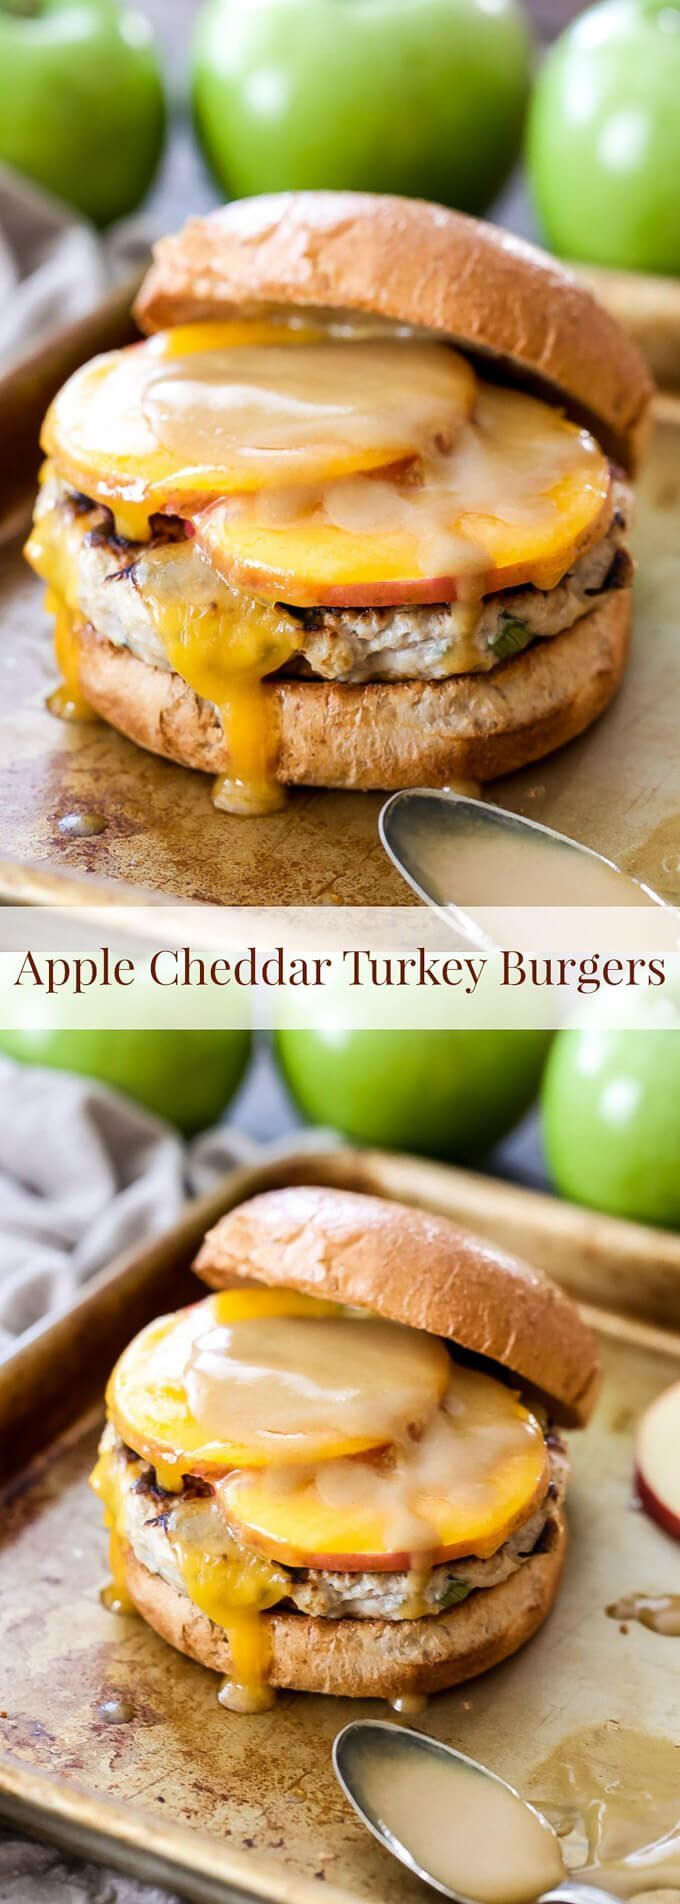 Say goodbye to dry, flavorless turkey burgers and hello to these juicy Apple Cheddar Turkey Burgers! Sliced apples, cheddar cheese